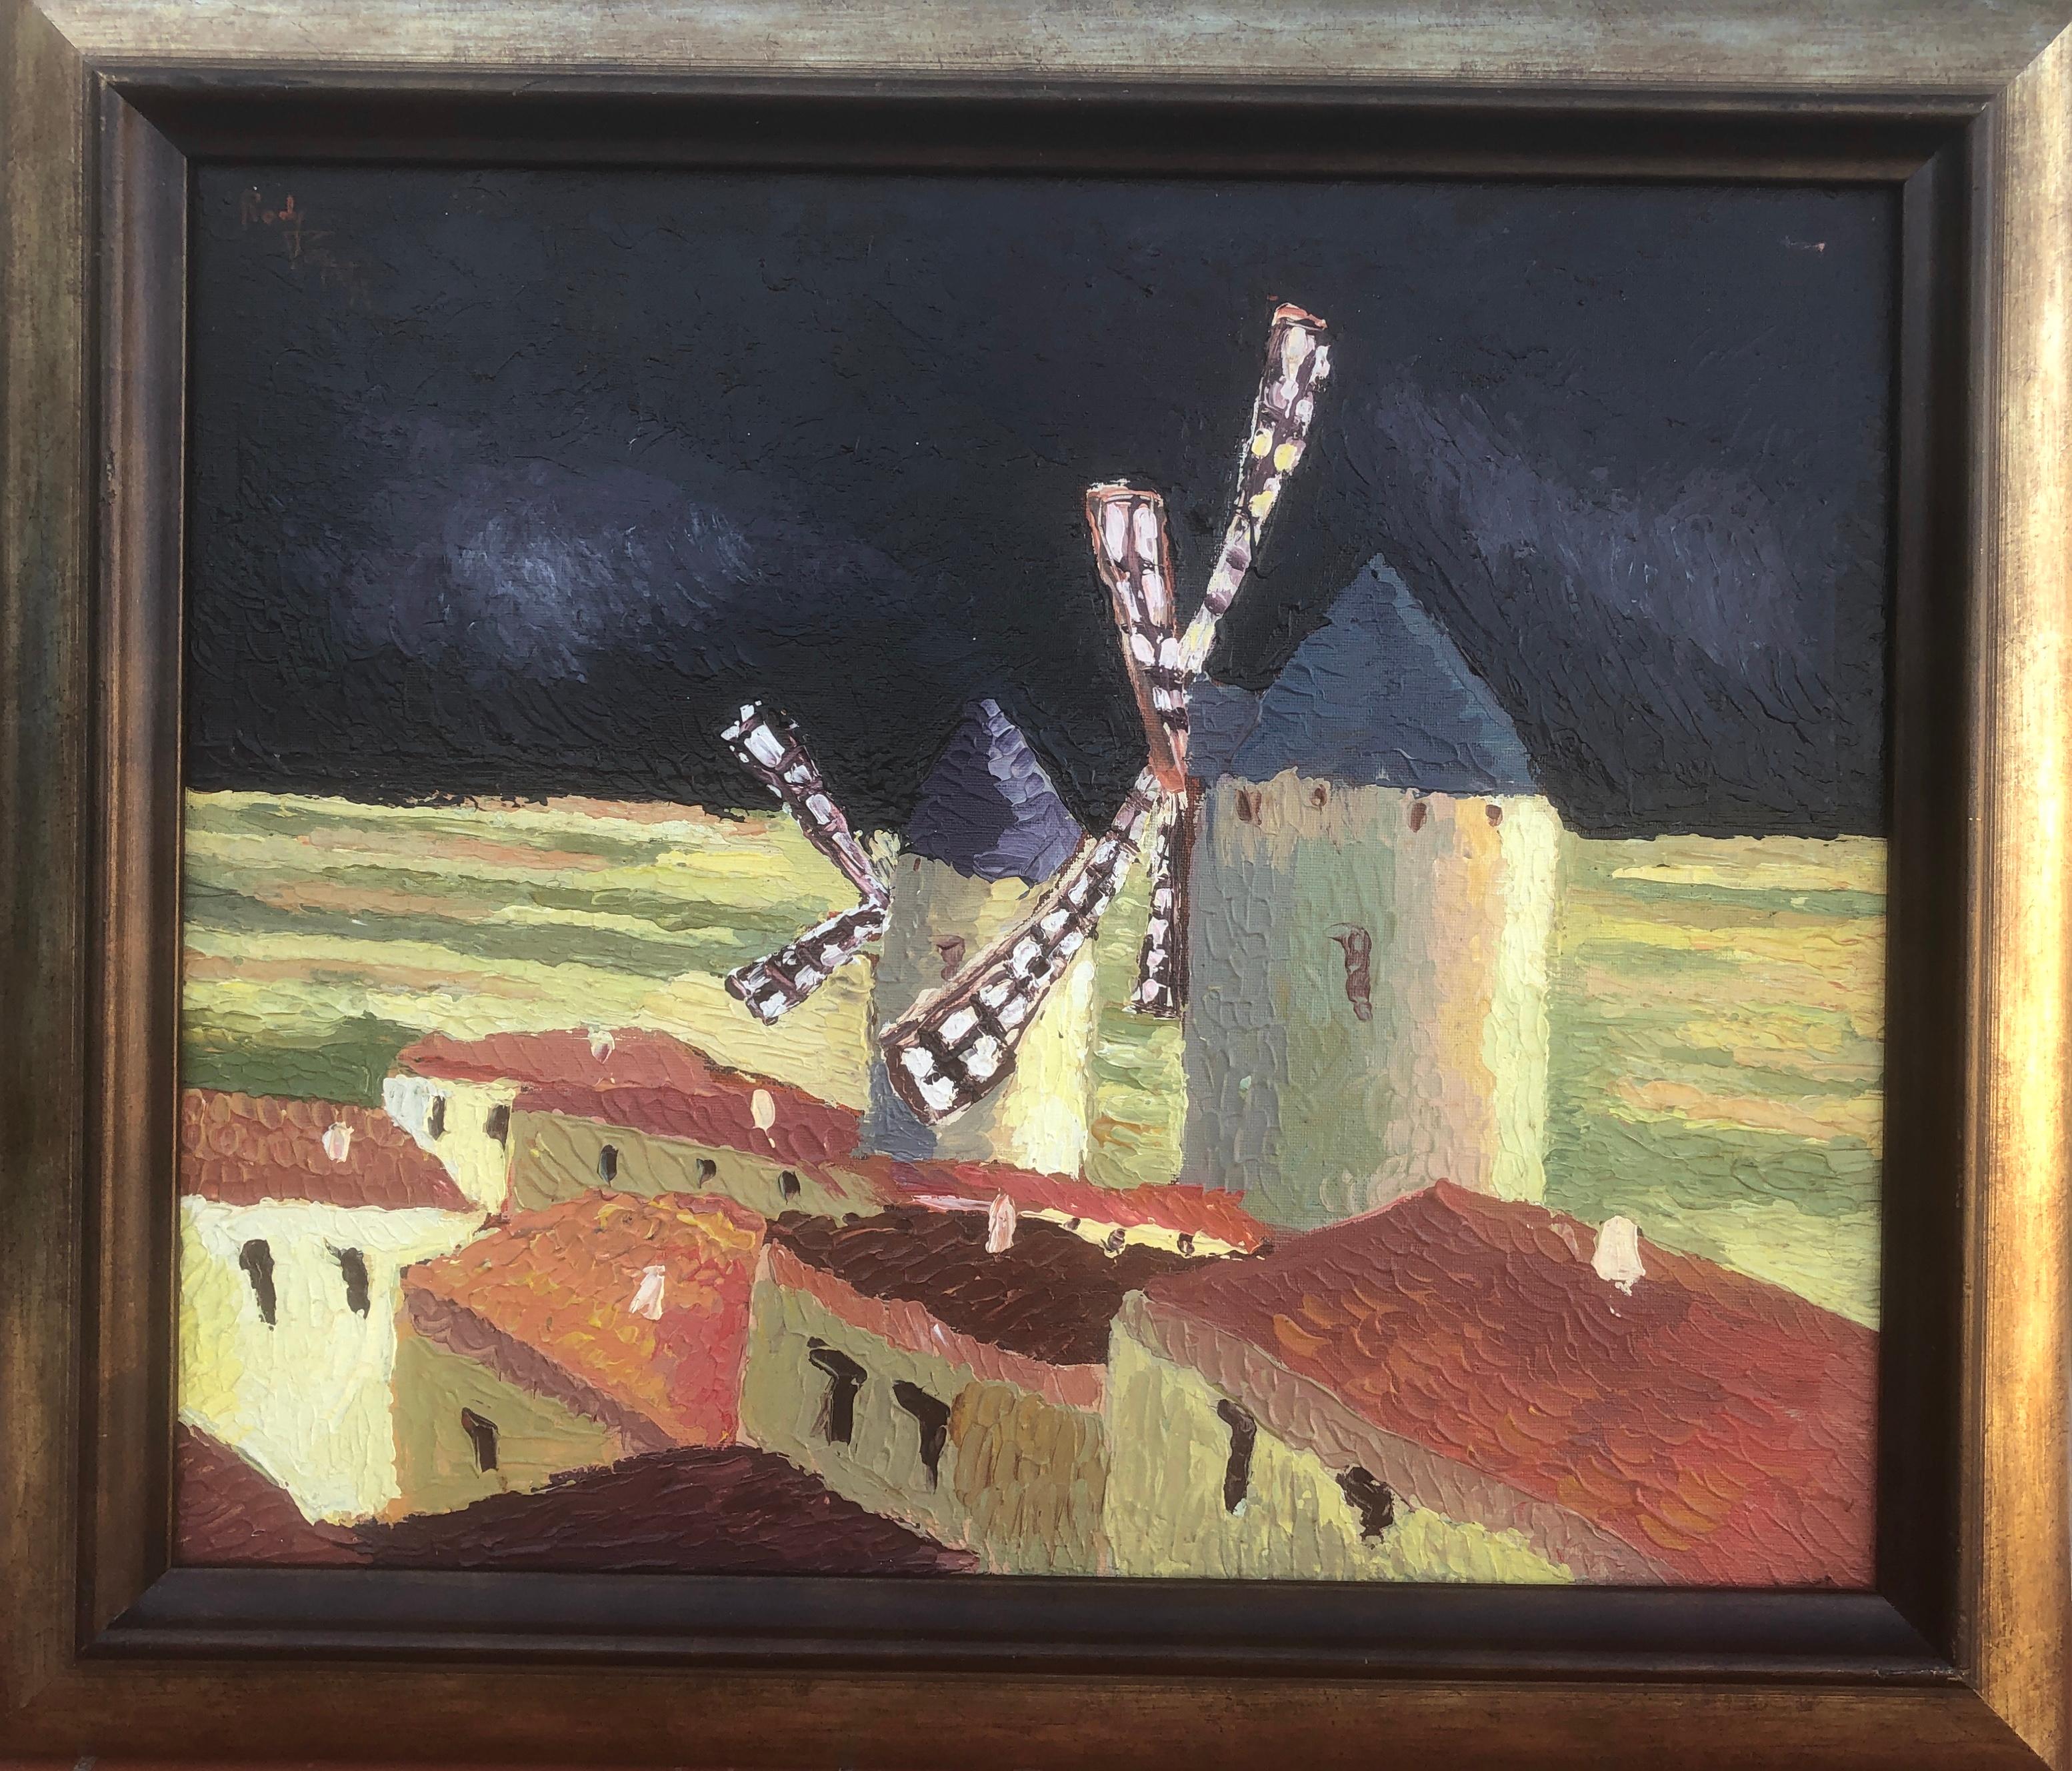 Windmills Lloret de Mar Spain spanish landscape oil on canvas painting - Painting by Rody